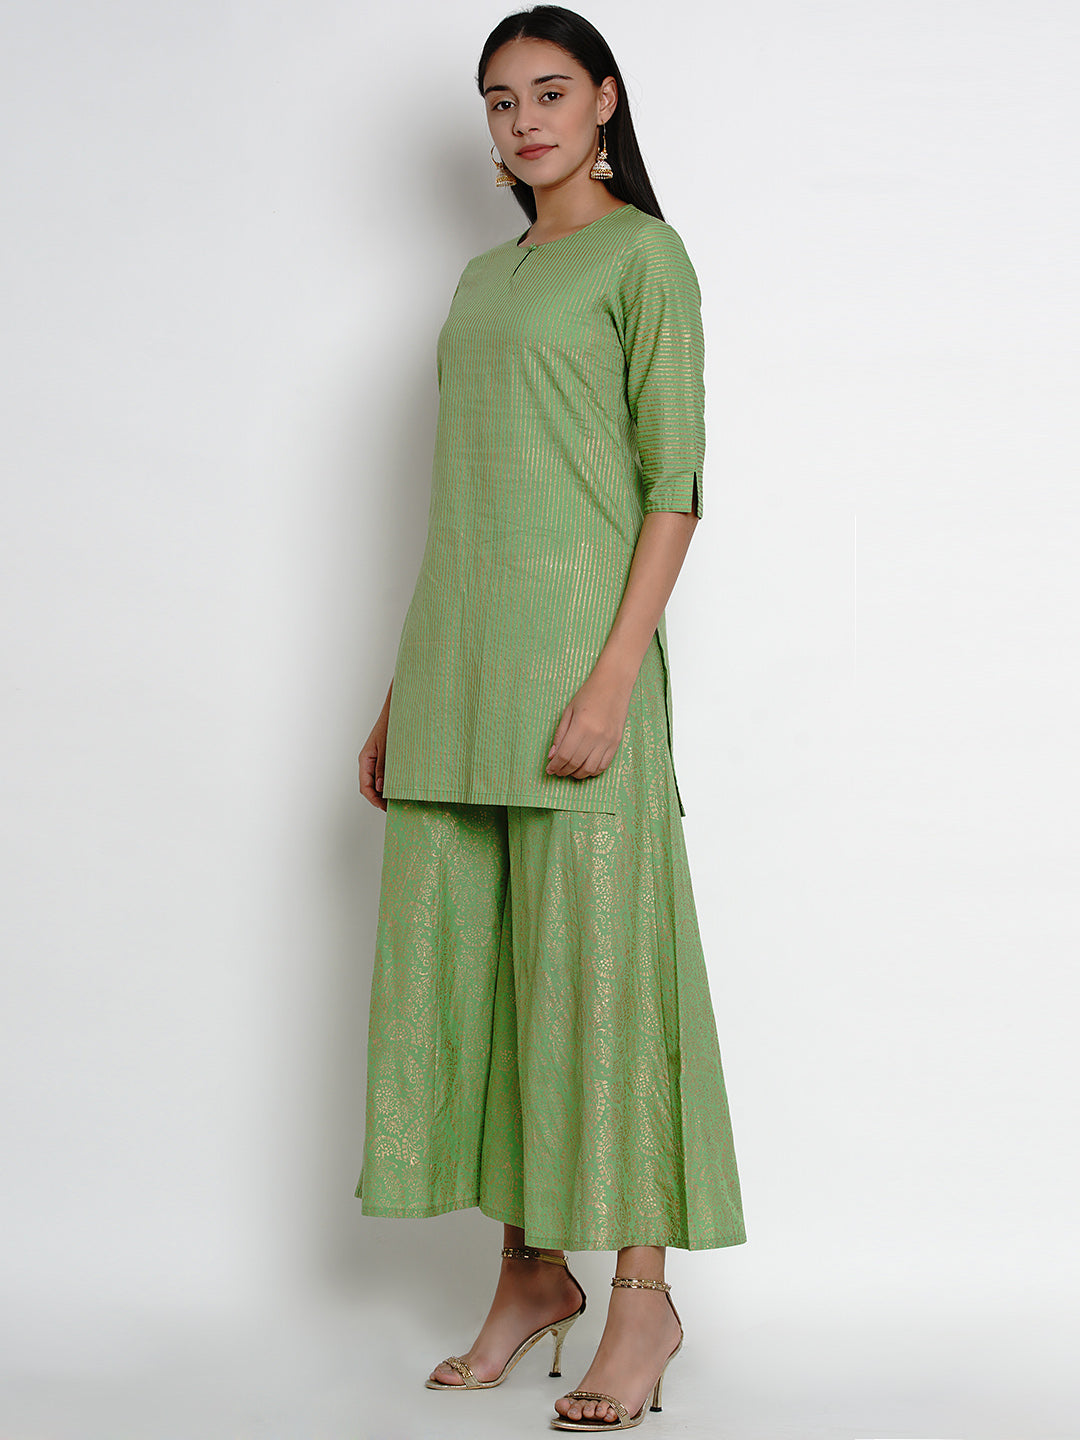 Women's Green And Gold-Toned Striped Kurta With Palazzos - Bhama Couture